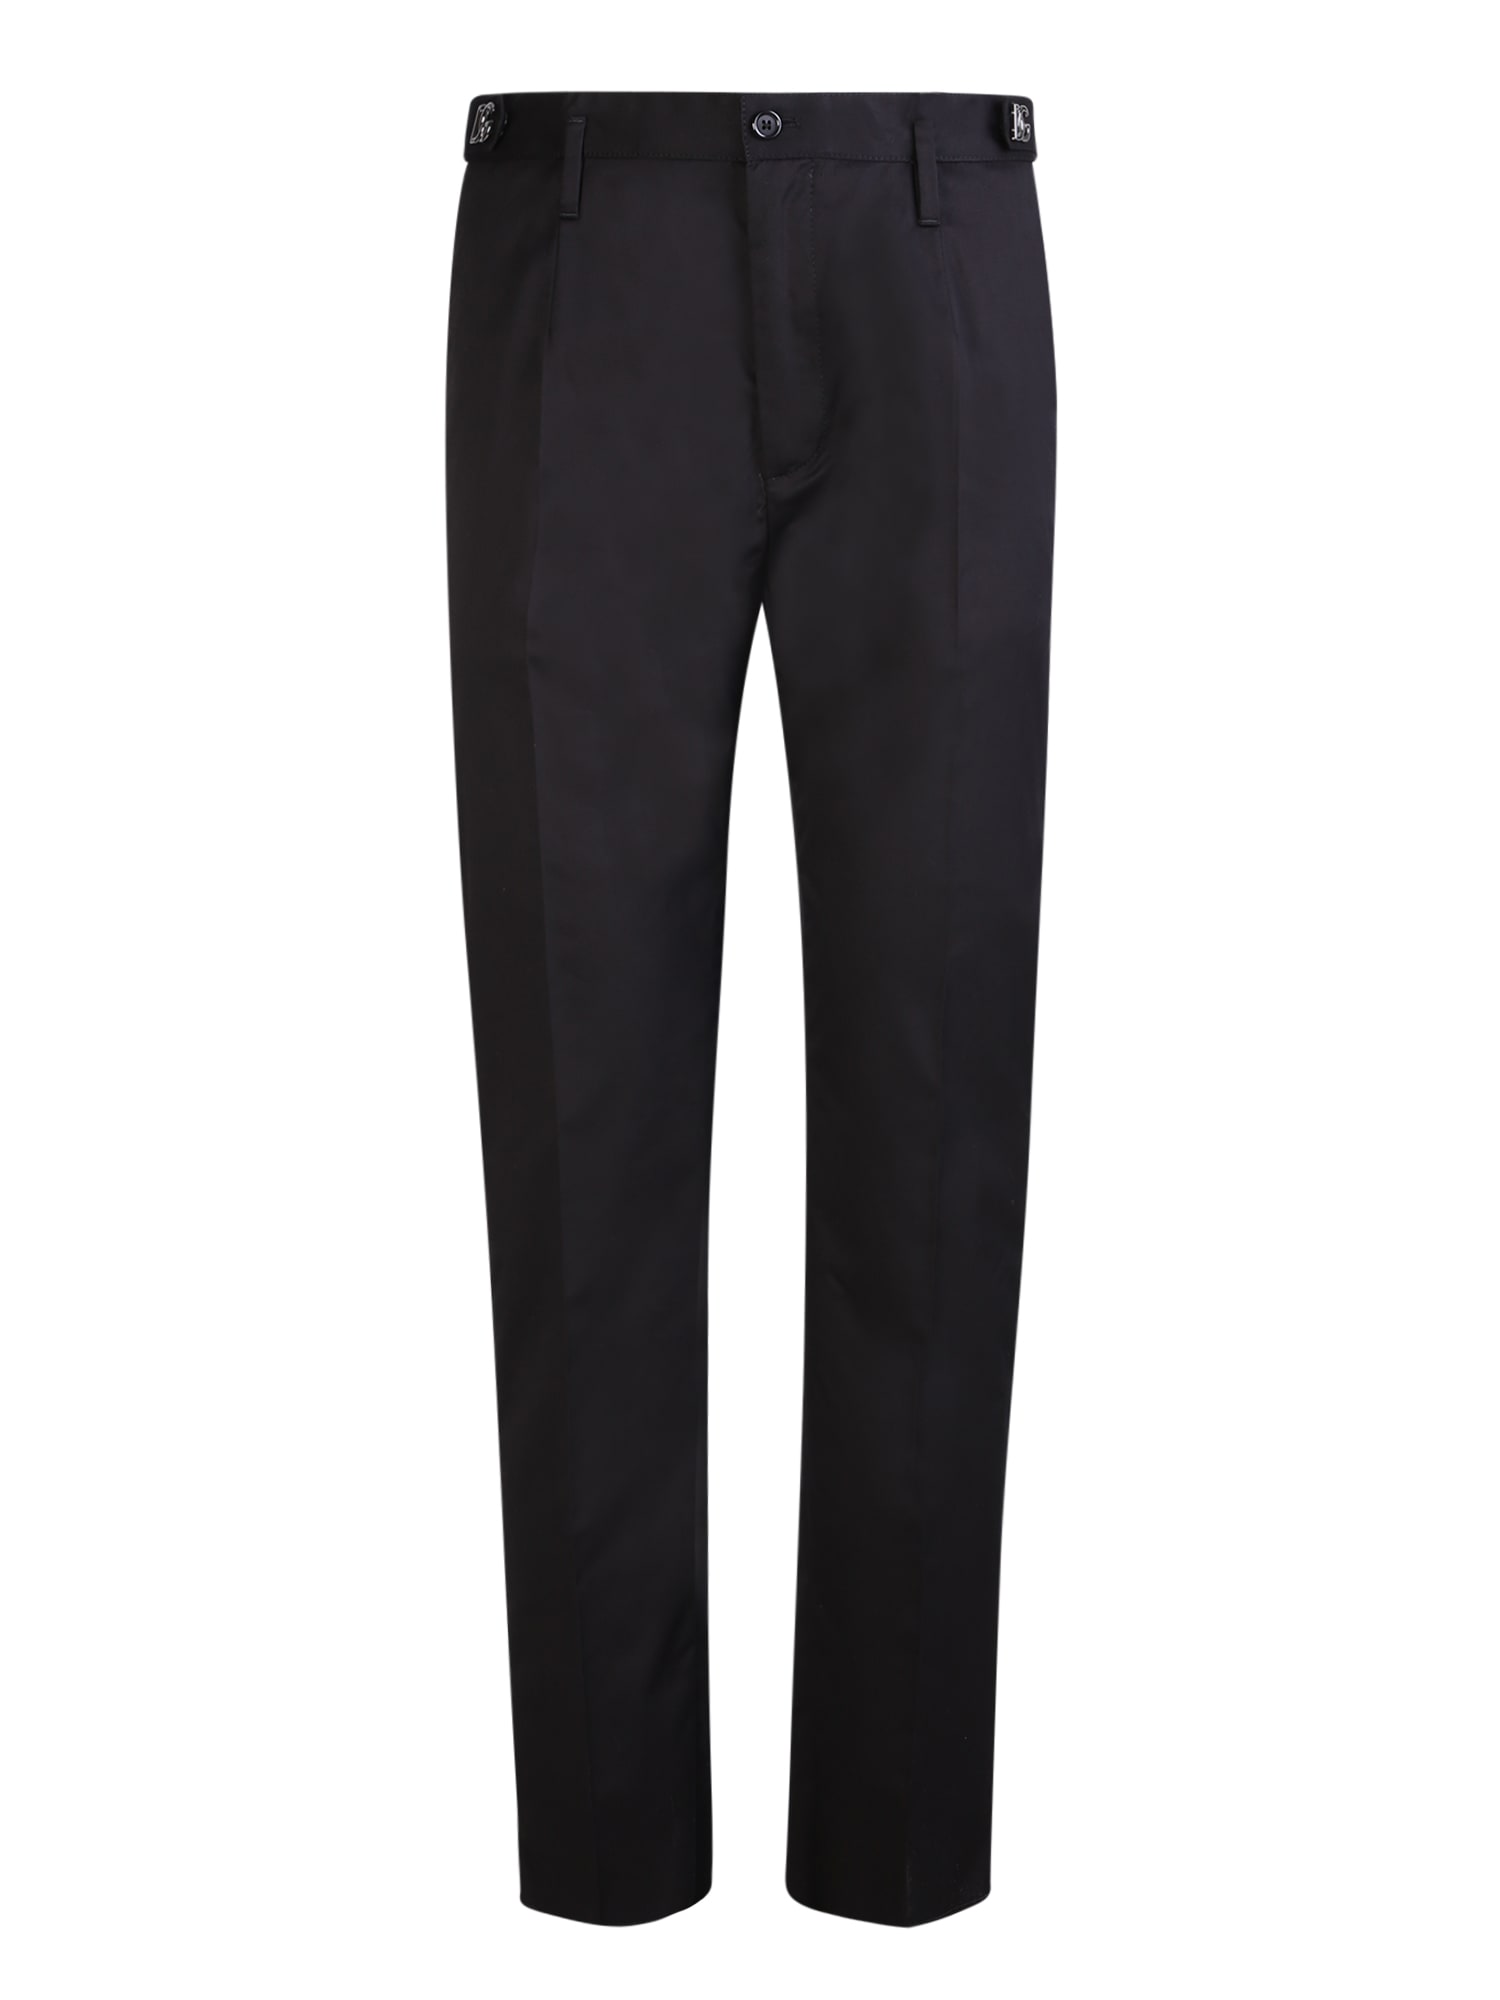 DOLCE & GABBANA TAILORED TROUSERS